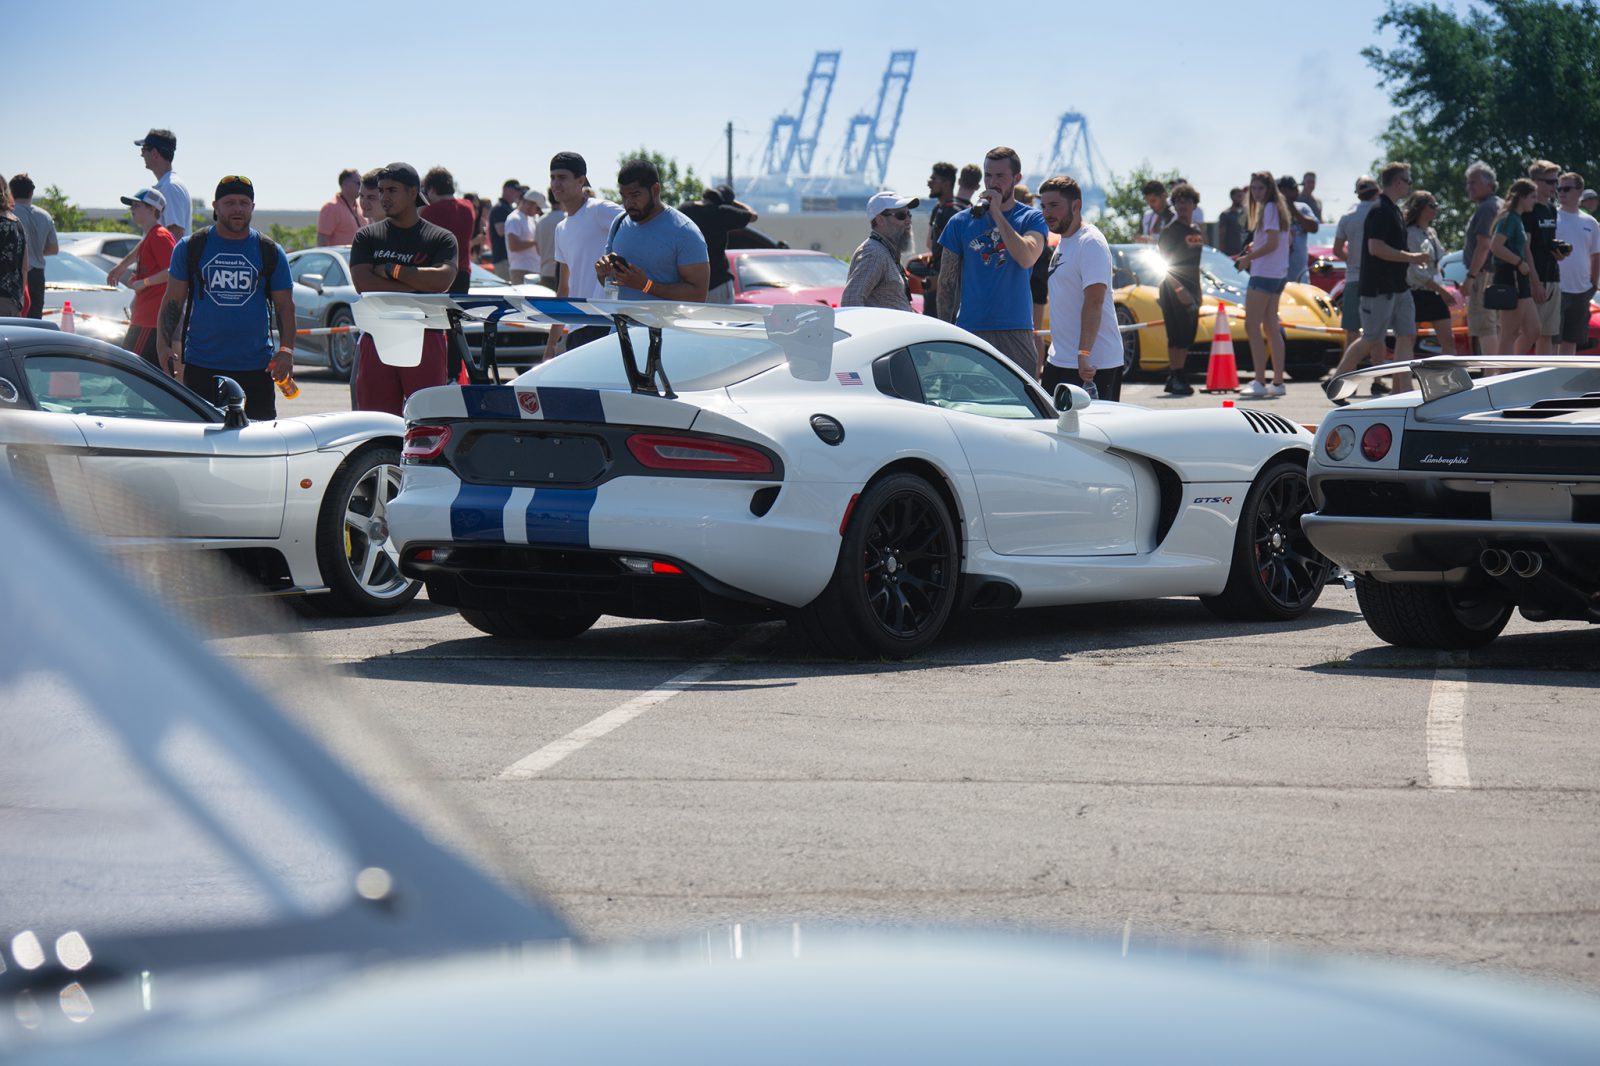 Customized Dodge Viper at the Supercar show